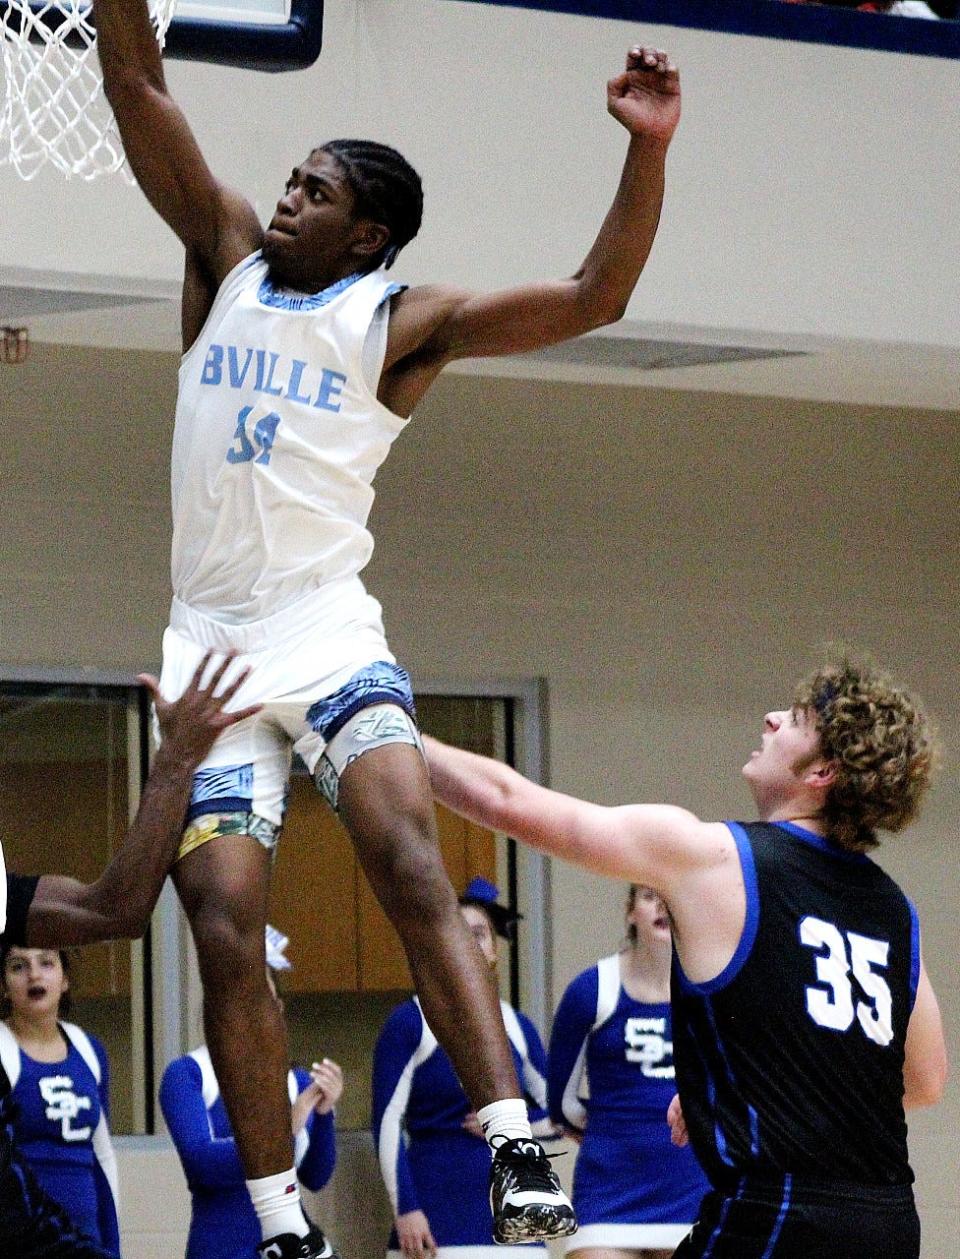 Bartlesville High's Caleb Rogers soars high to the rim during the season home opener on Dec. 2, 2022, against Sapulpa High.